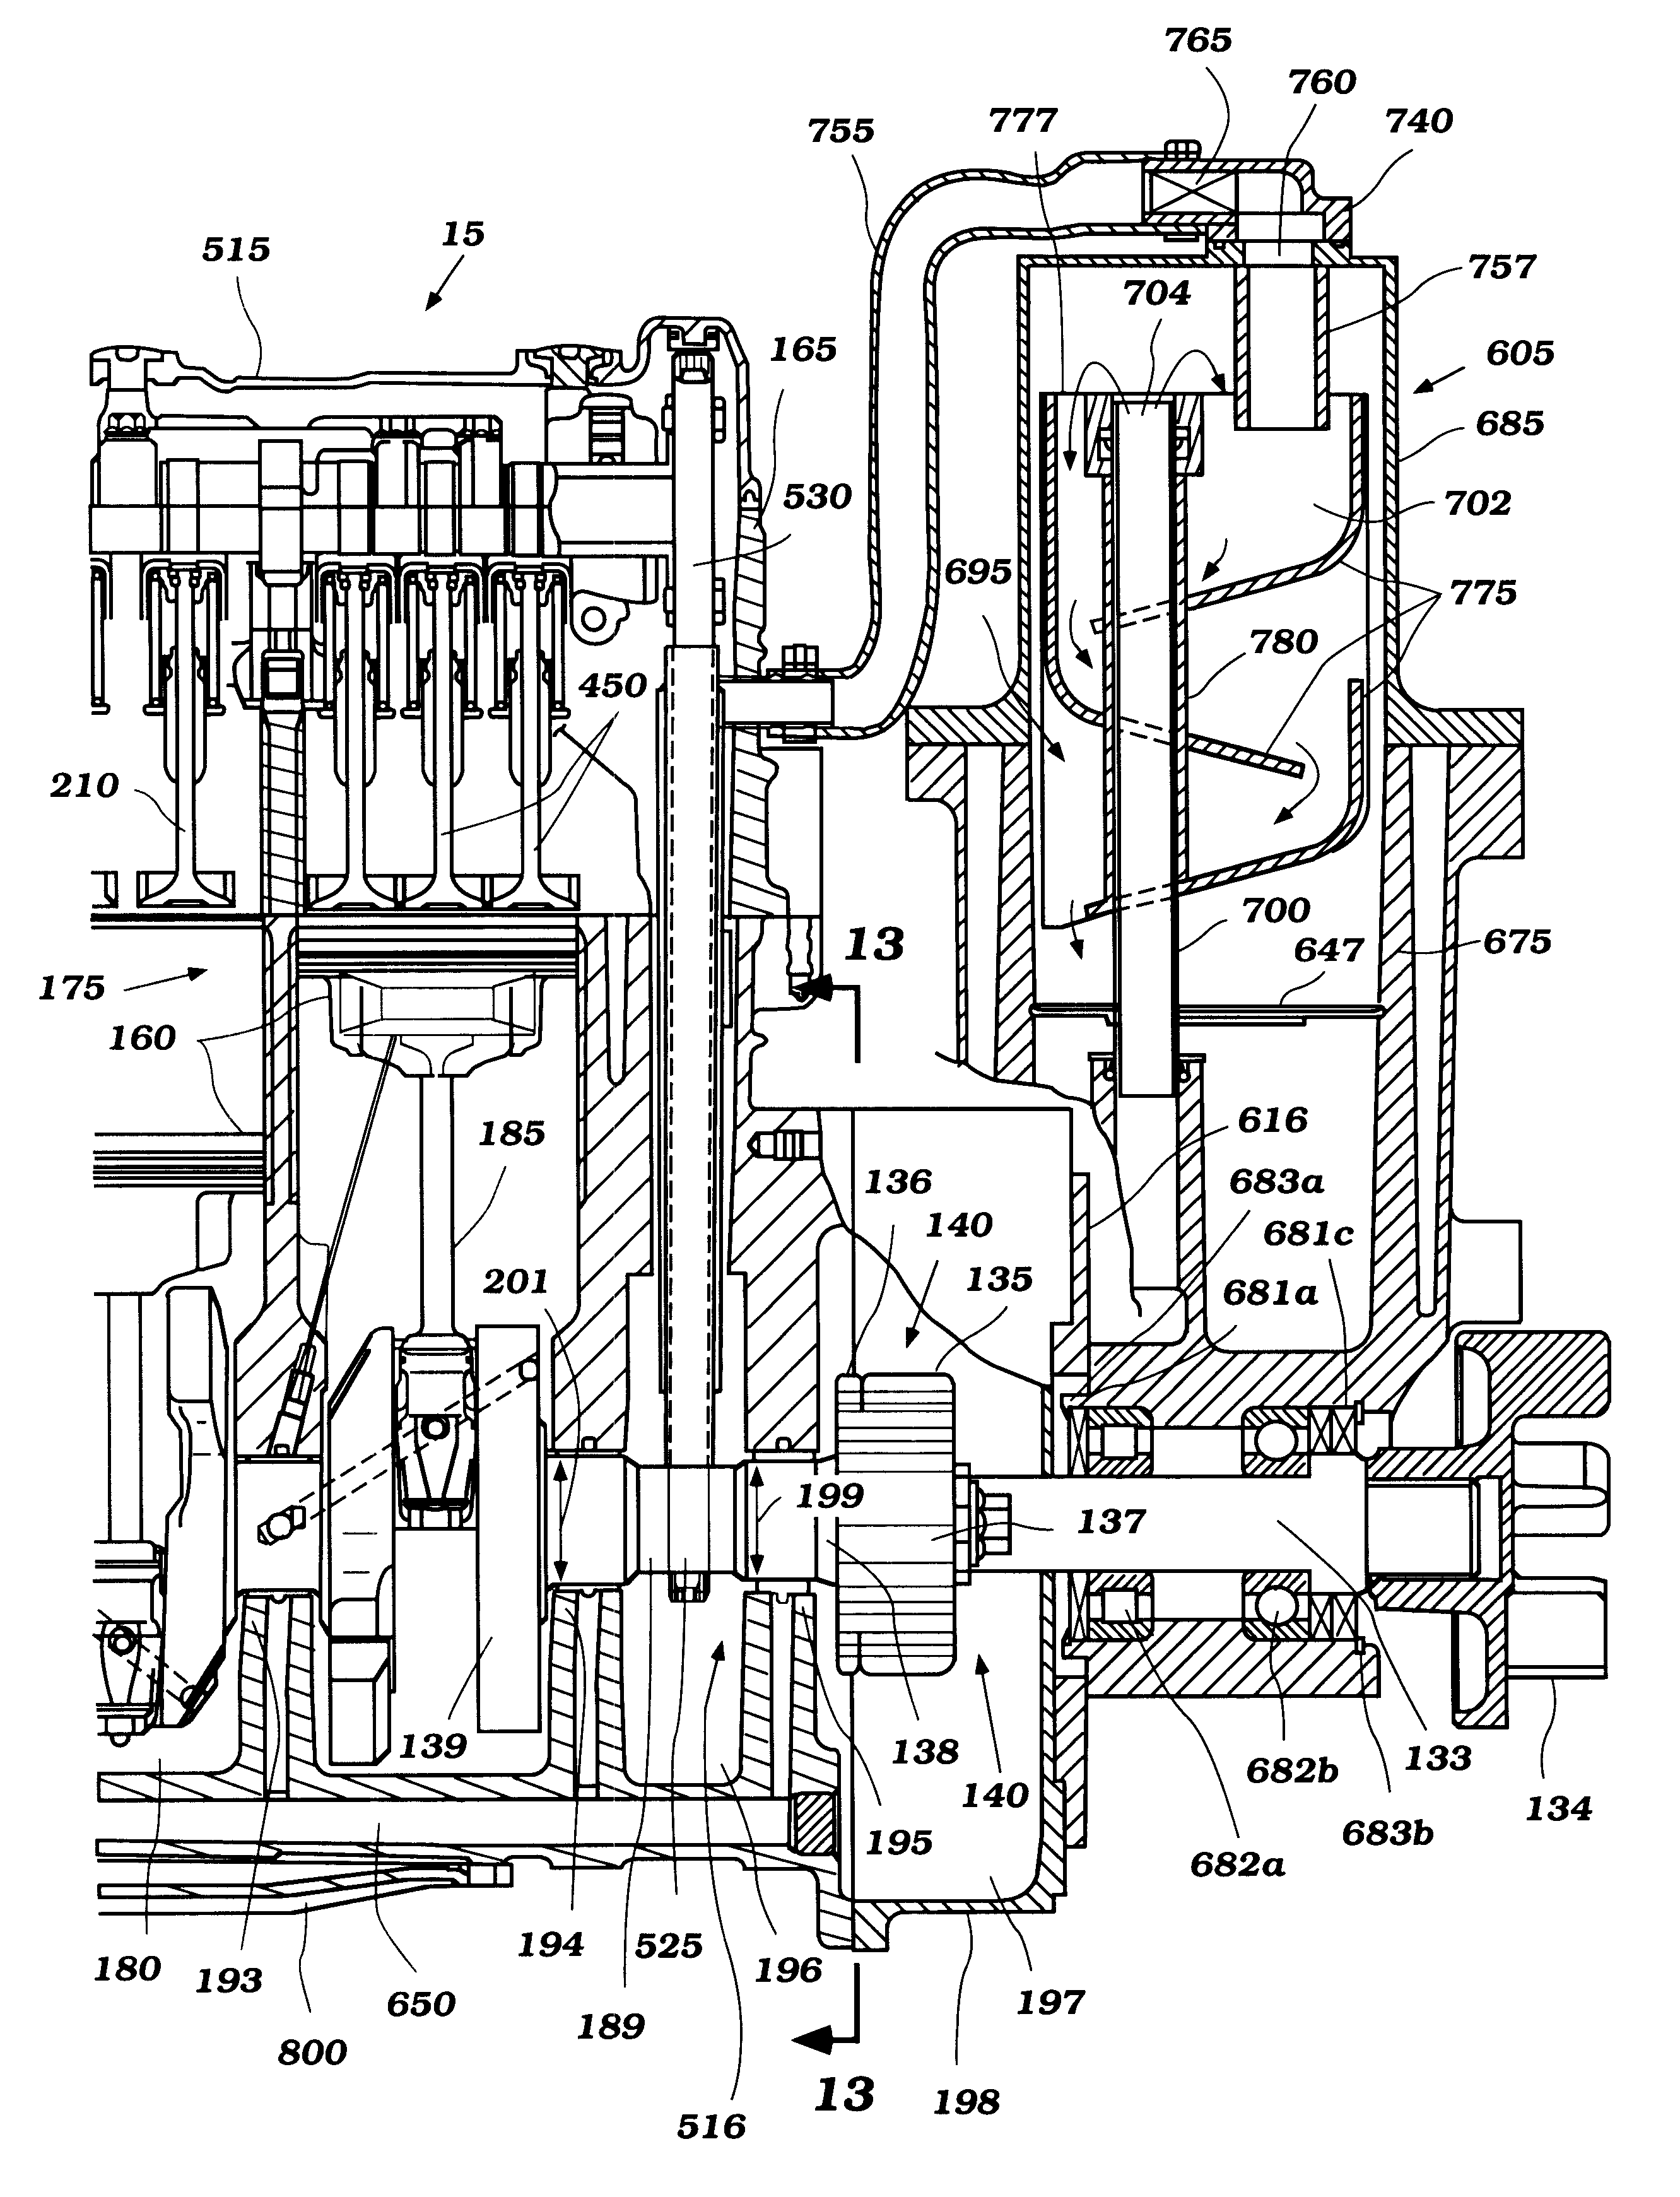 Oil pump construction for watercraft engine